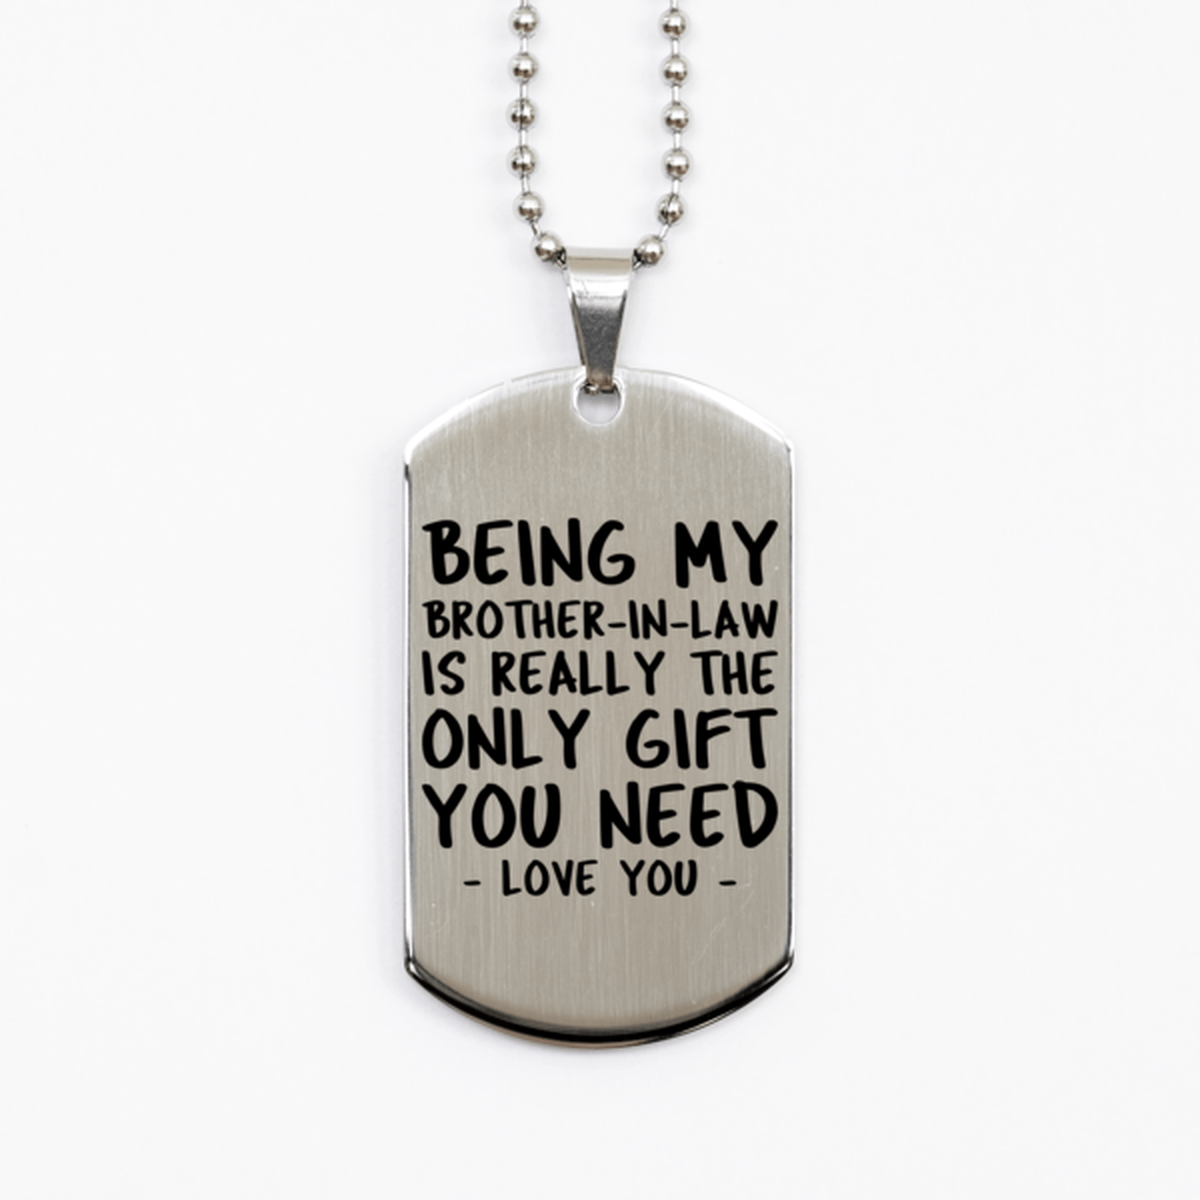 Funny Brother-in-law Silver Dog Tag Necklace, Being My Brother-in-law Is Really the Only Gift You Need, Best Birthday Gifts for Brother-in-law